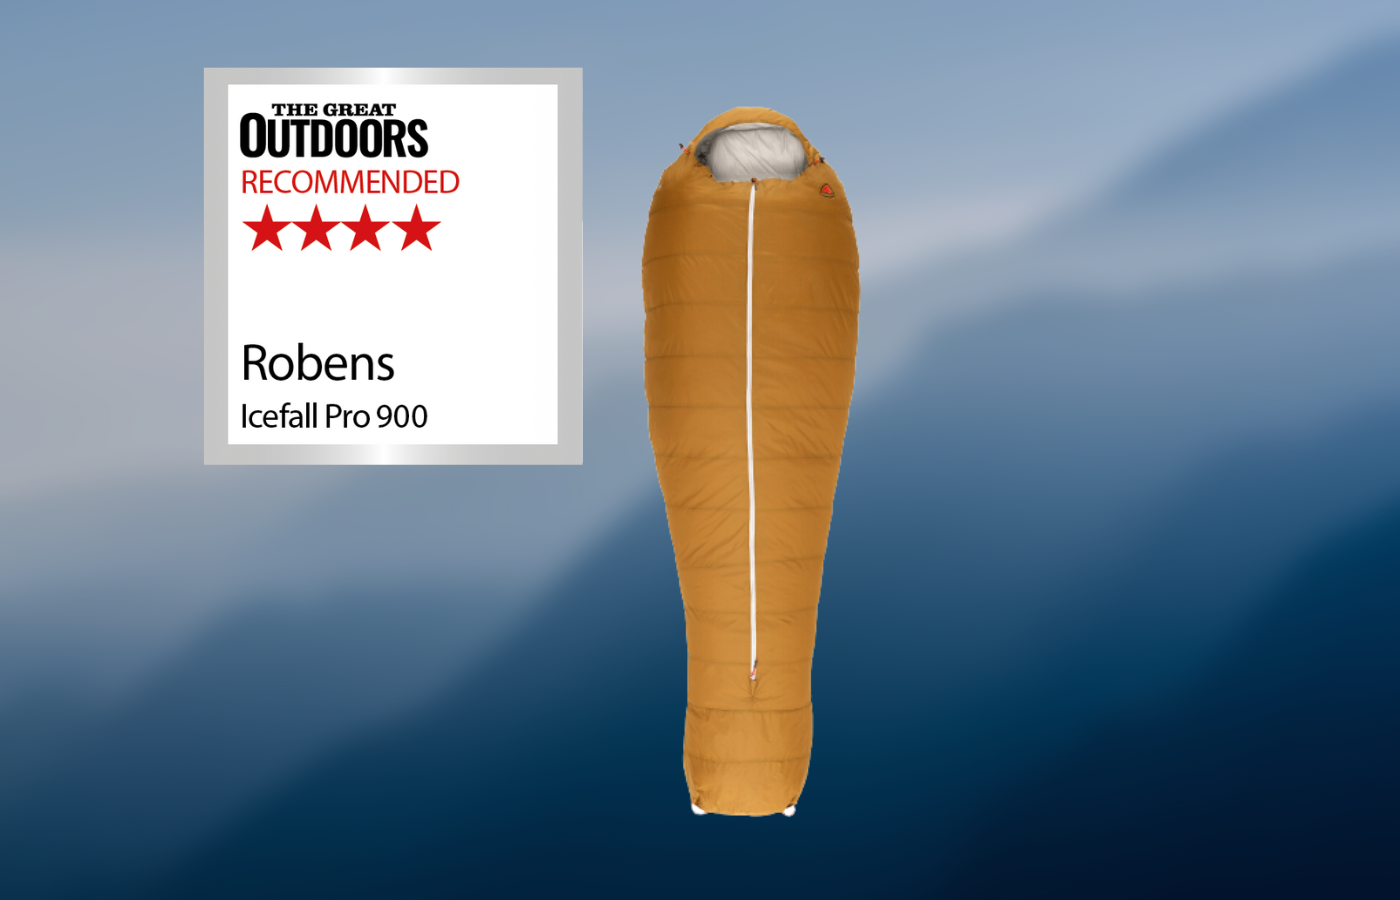 Robens Icefall Pro 900 review